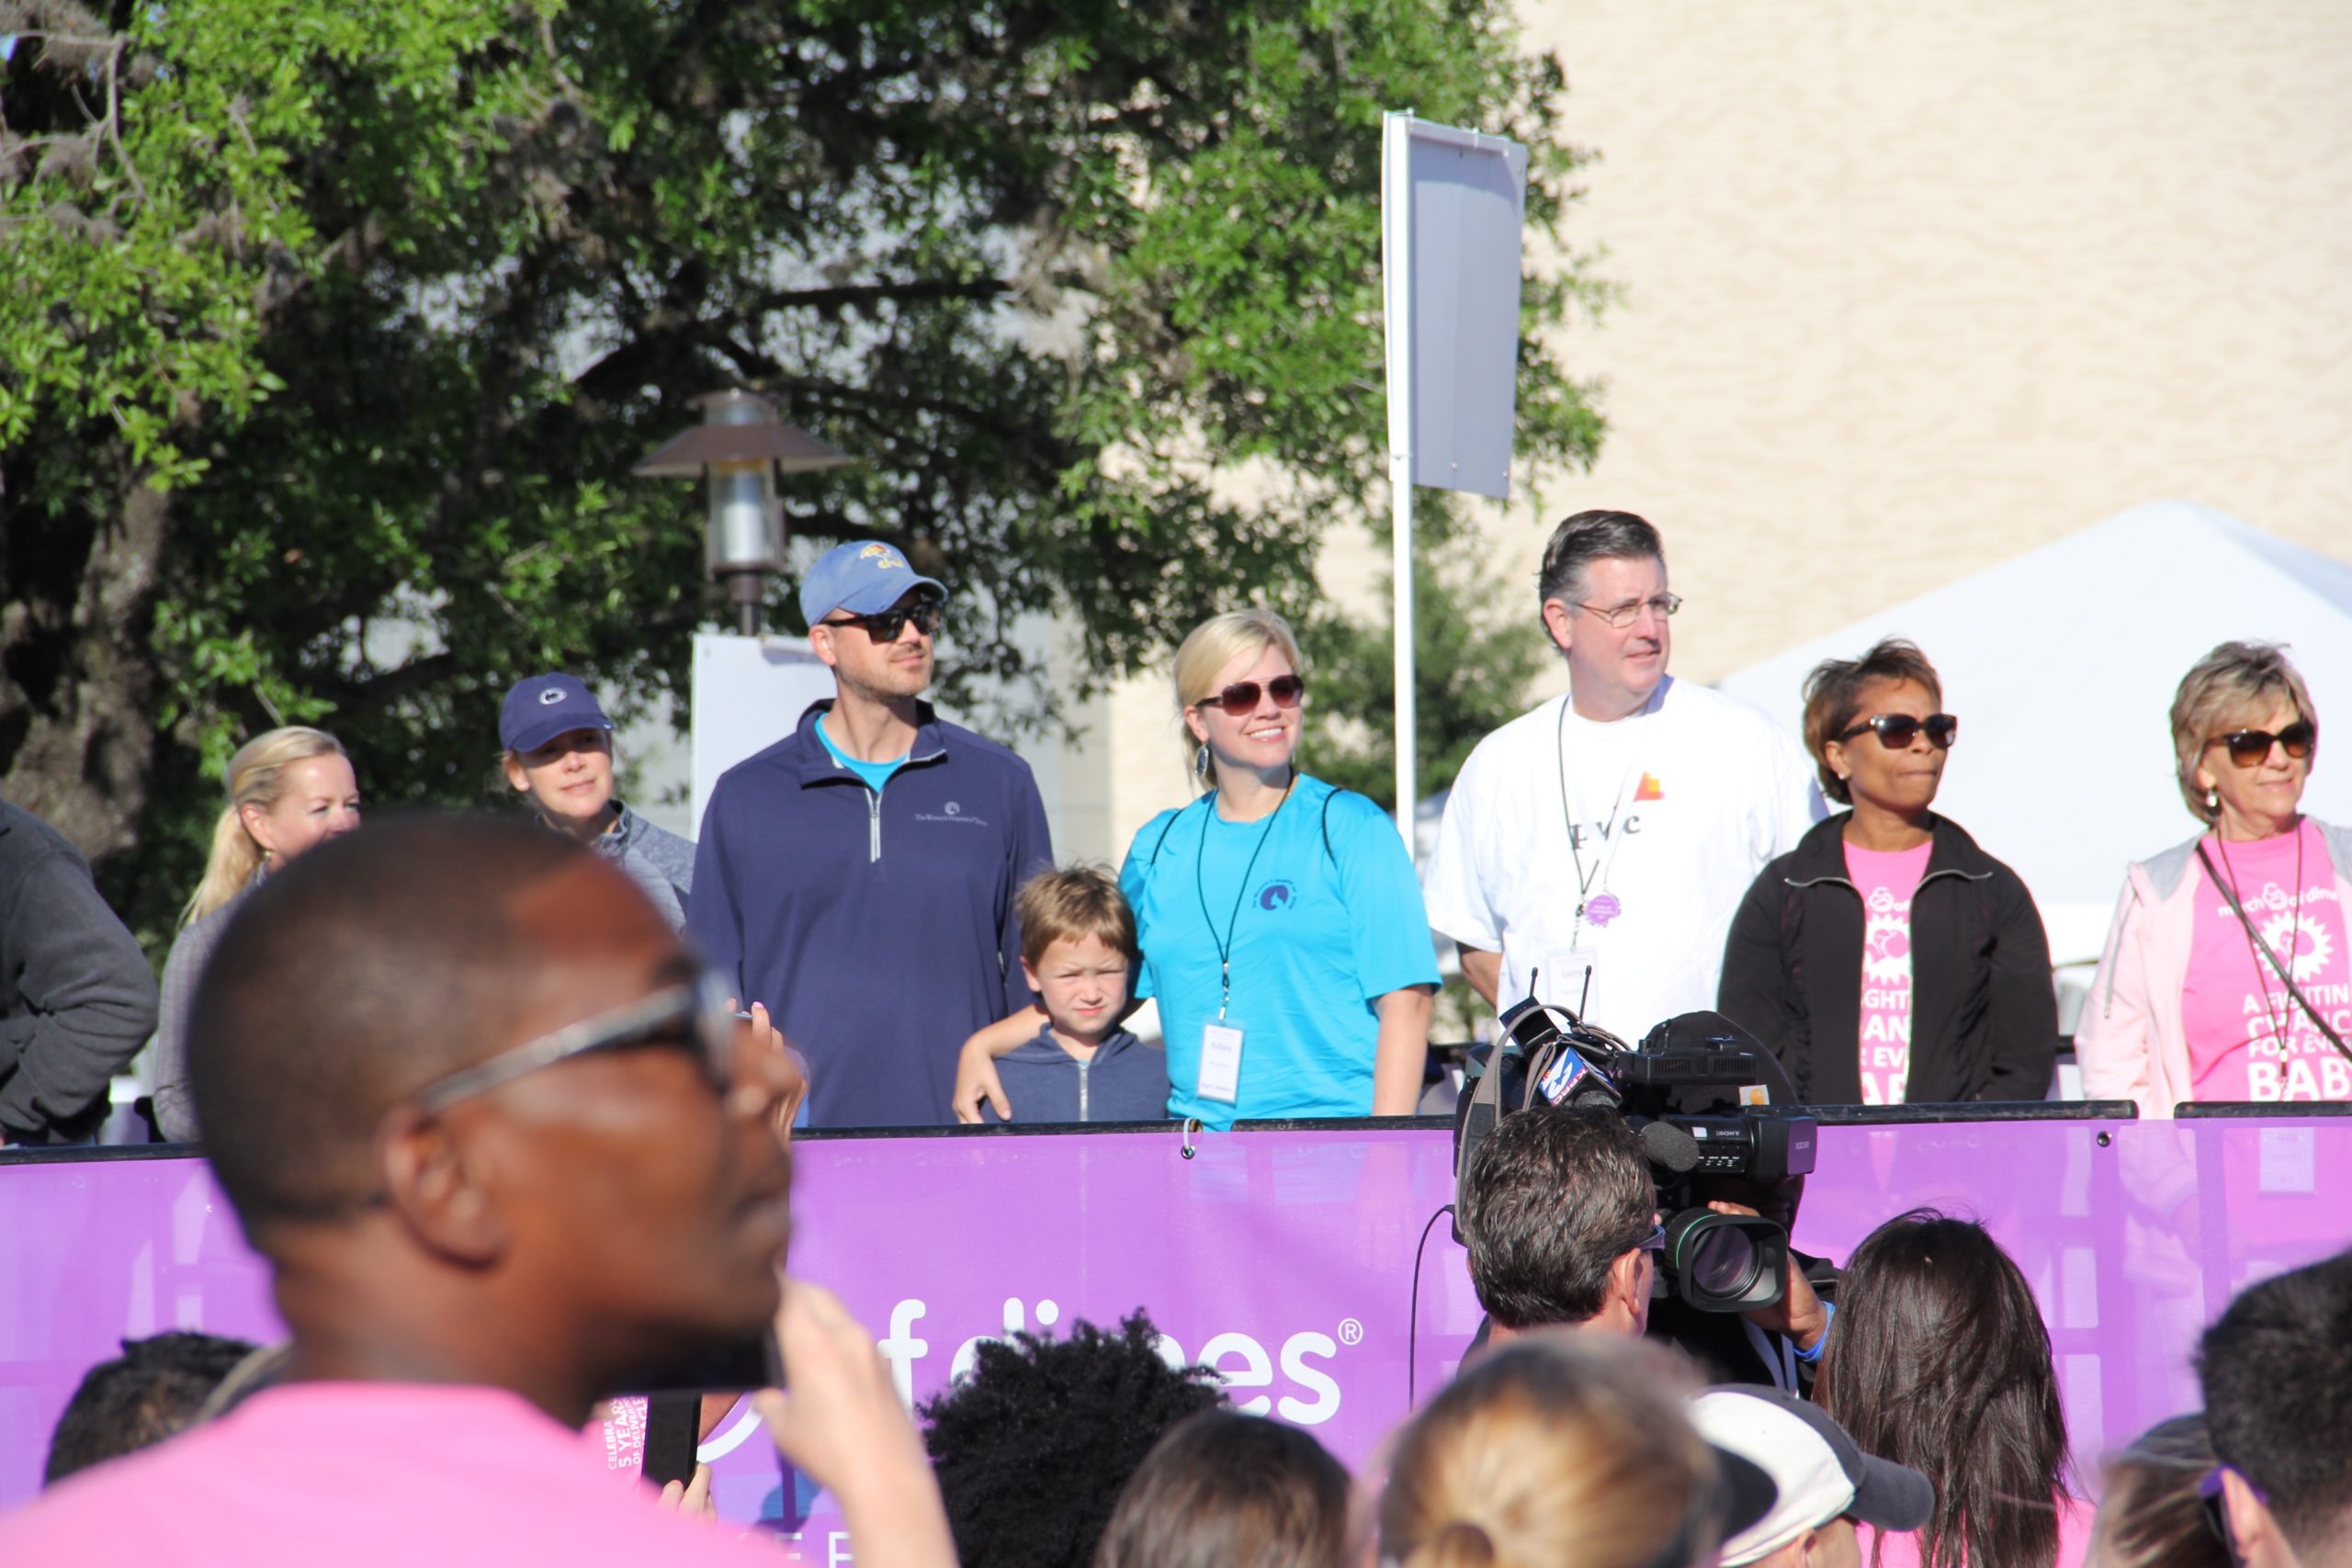 A group of people on stage before charity walk event